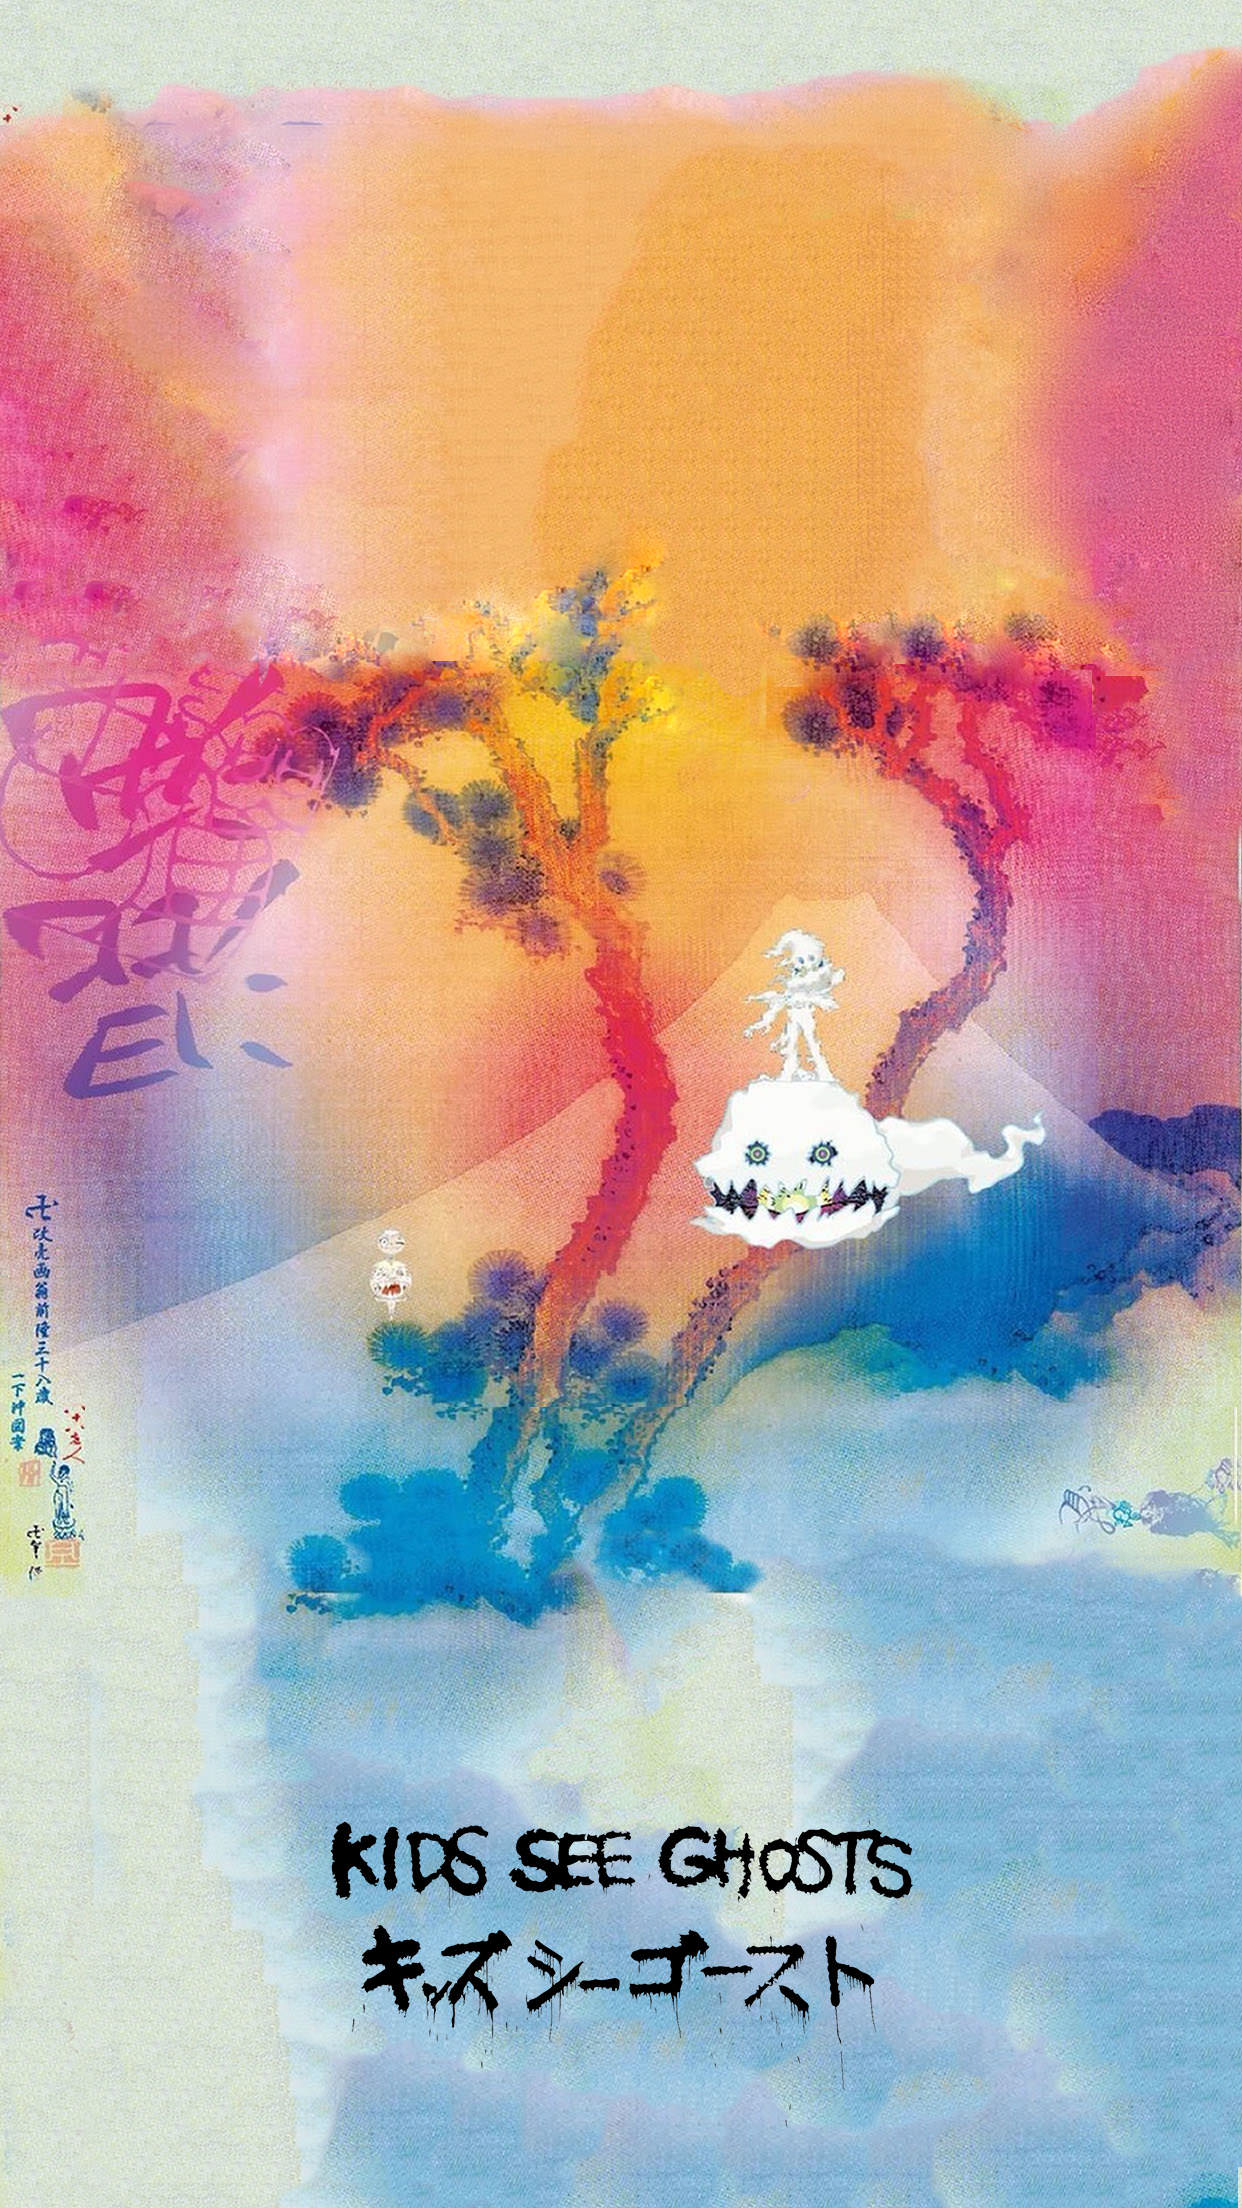 Kids See Ghosts Album Cover - HD Wallpaper 